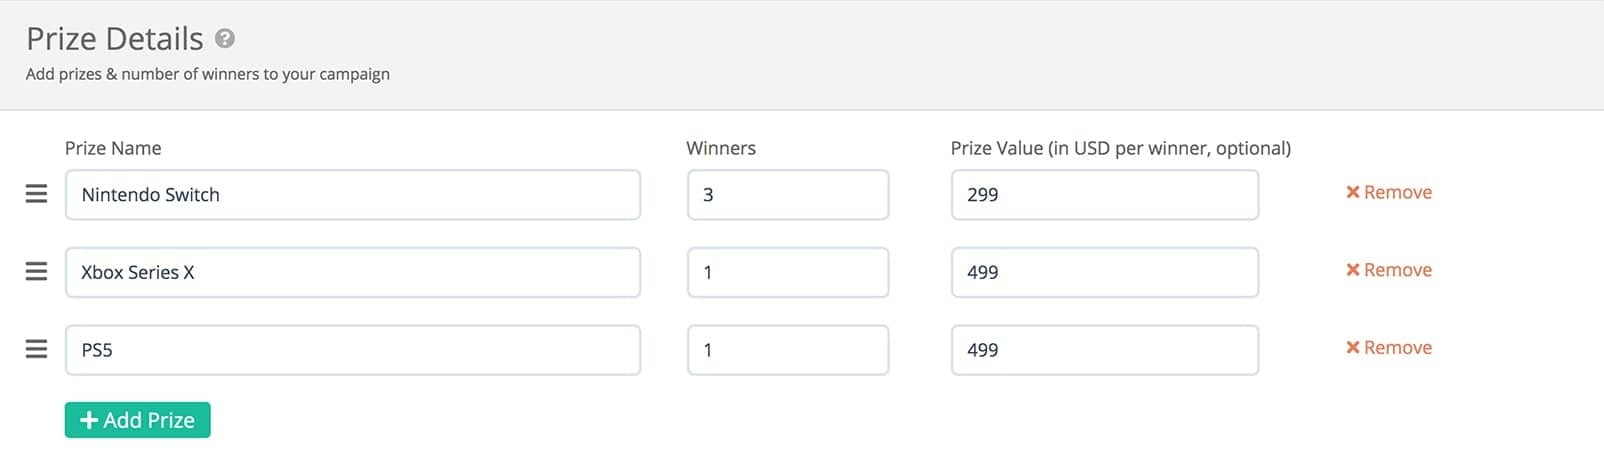 Gleam interface showing prize details with multiple prizes